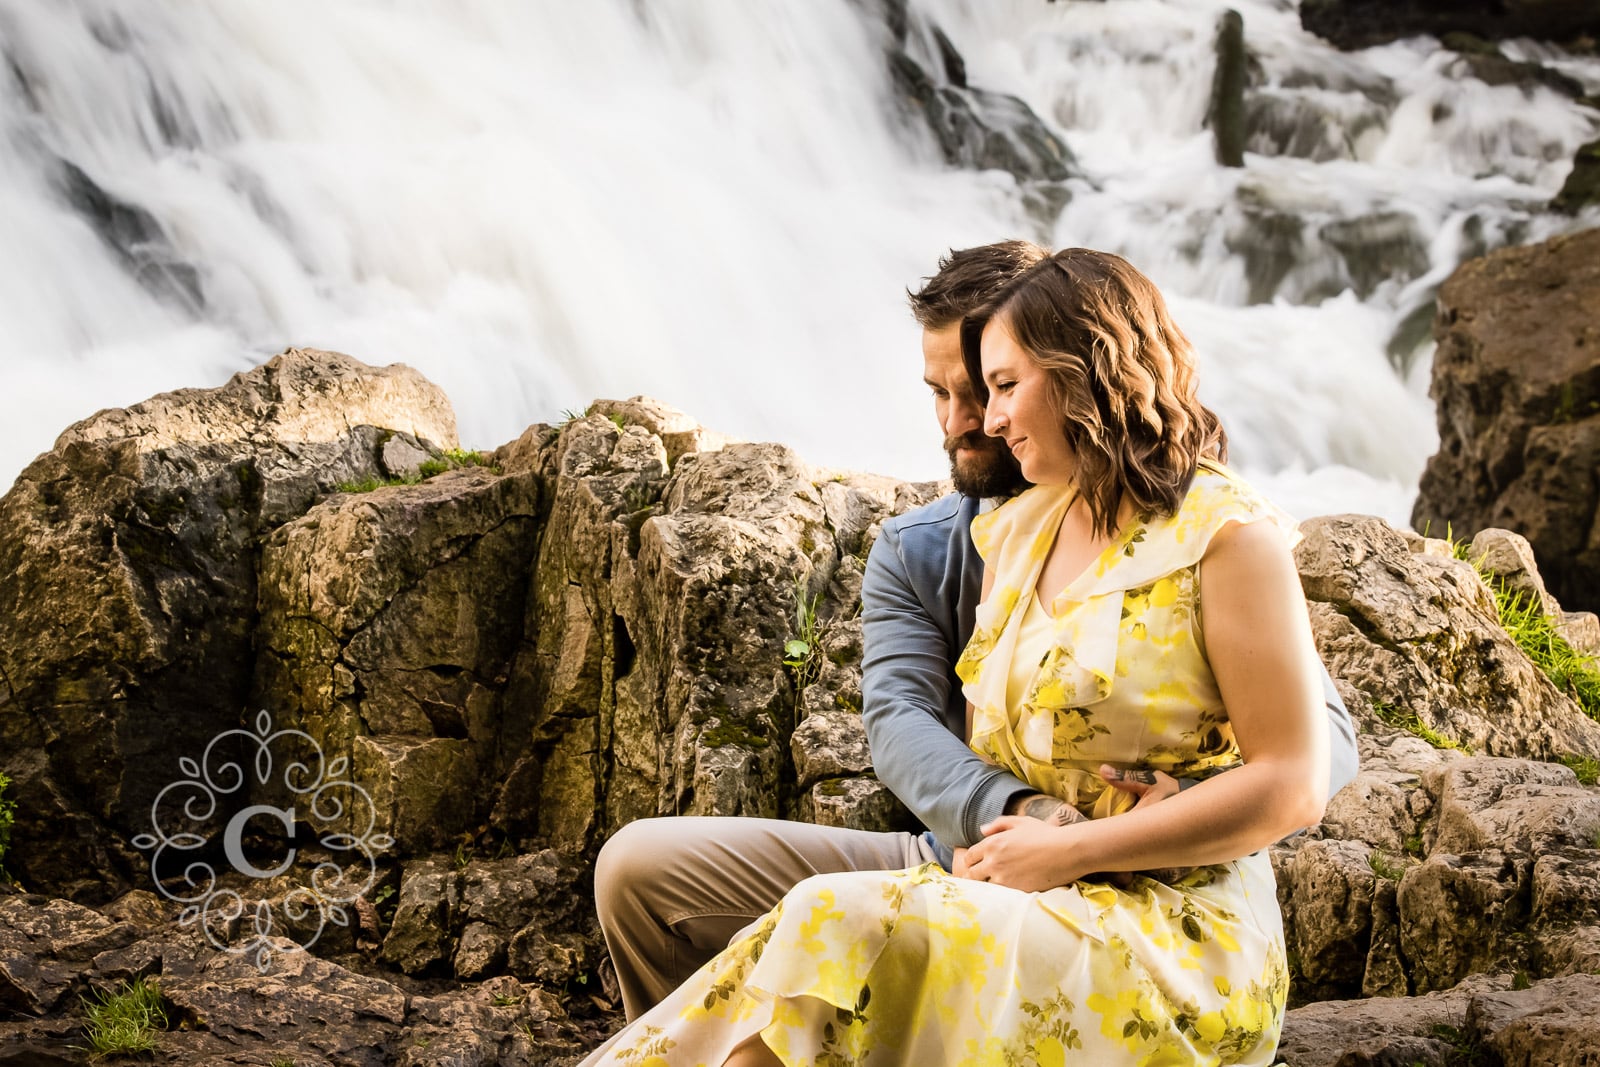 Minneapolis Waterfall River Engagement Photography